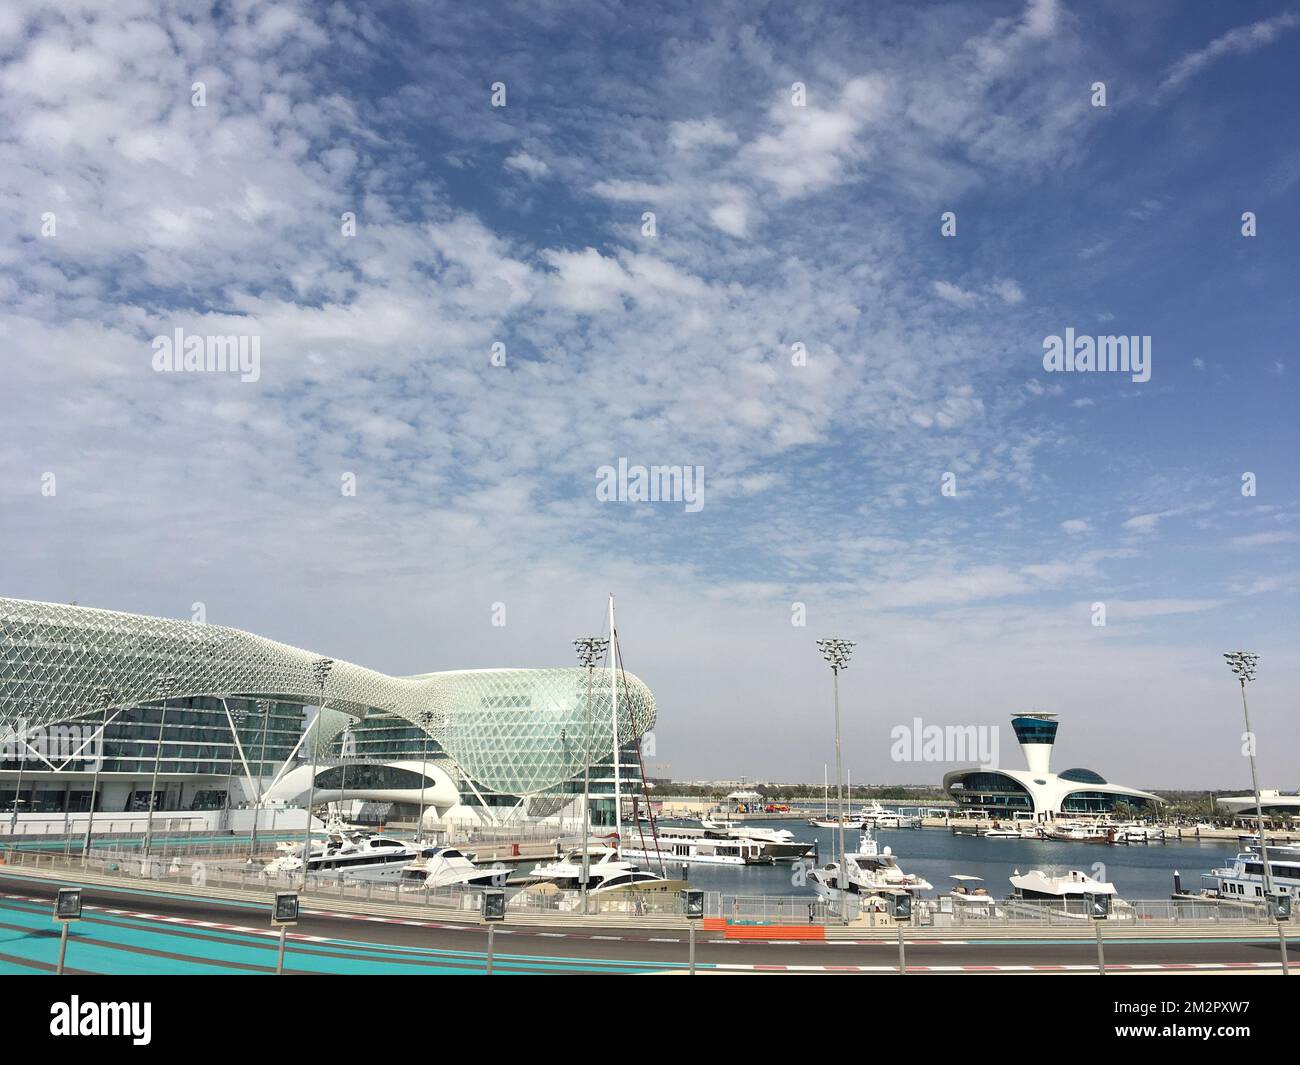 Illustration picture shows the 'YAS hotel' at the Yas Marina Race Circuit in Abu Dhabi, before the 'UAE Tour' 2019 cycling race in Abu Dhabi, United Arab Emirates, Friday 22 February 2019. This year's edition is taking place from 24 February to 2 March. BELGA PHOTO ANN BRAECKMAN FRANCE OUT Stock Photo